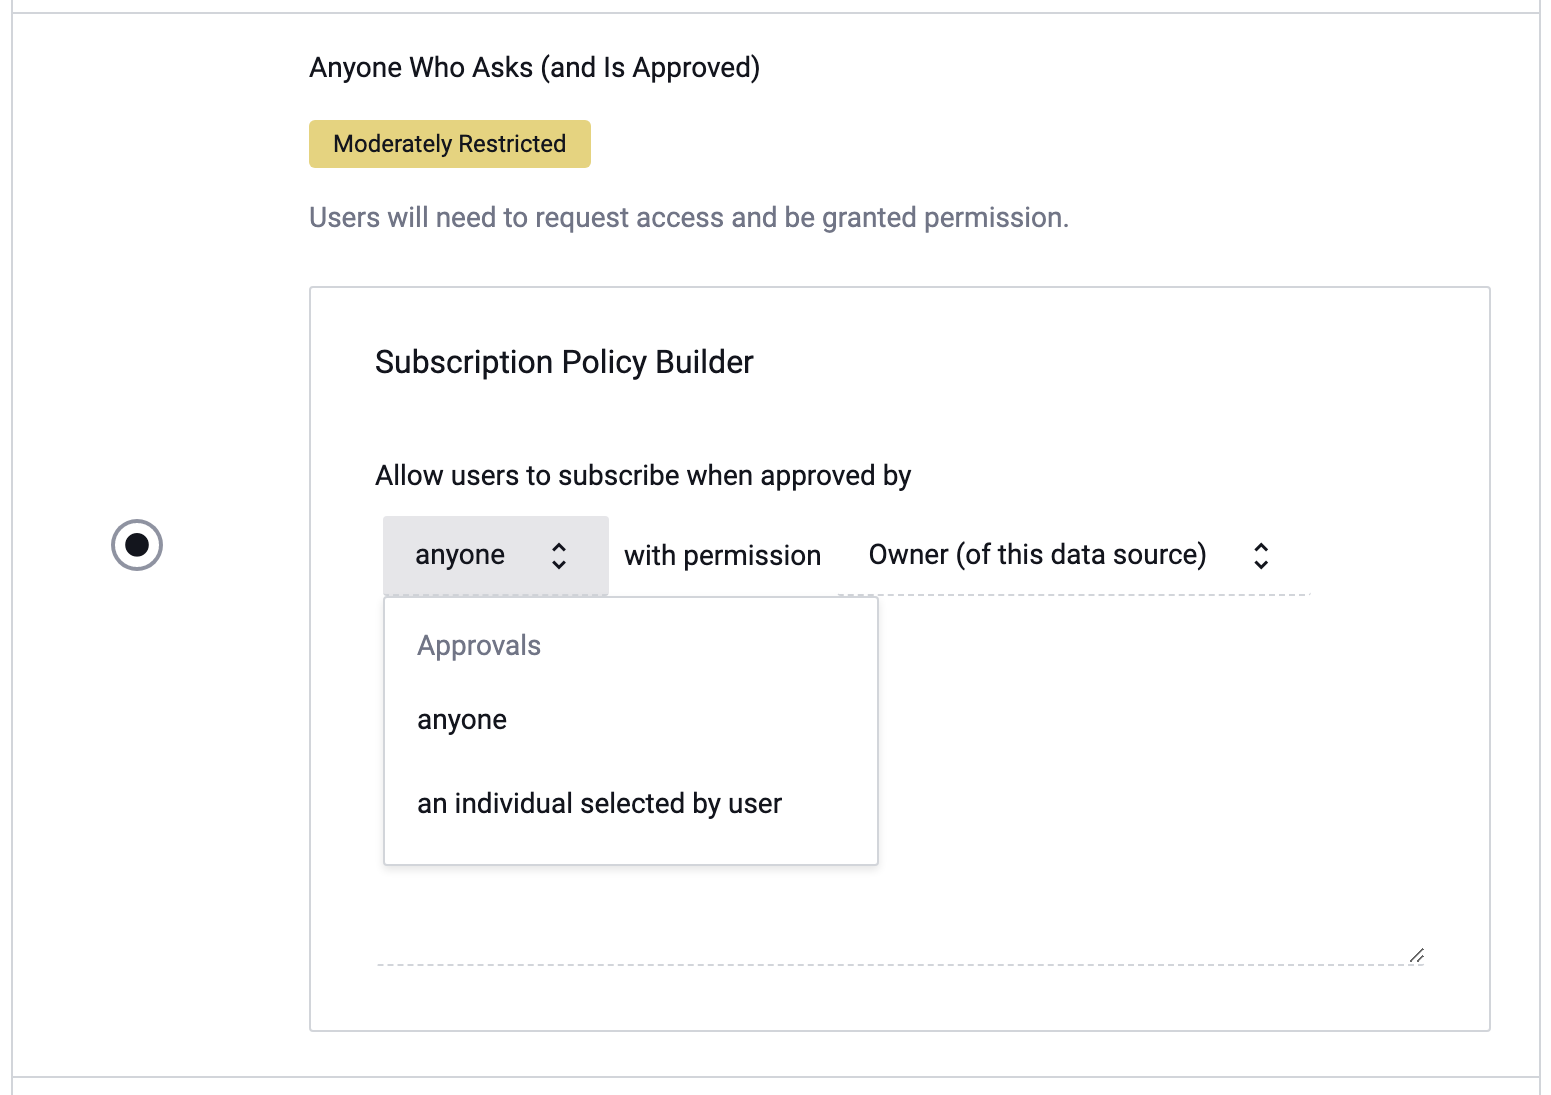 Subscription Policy Builder